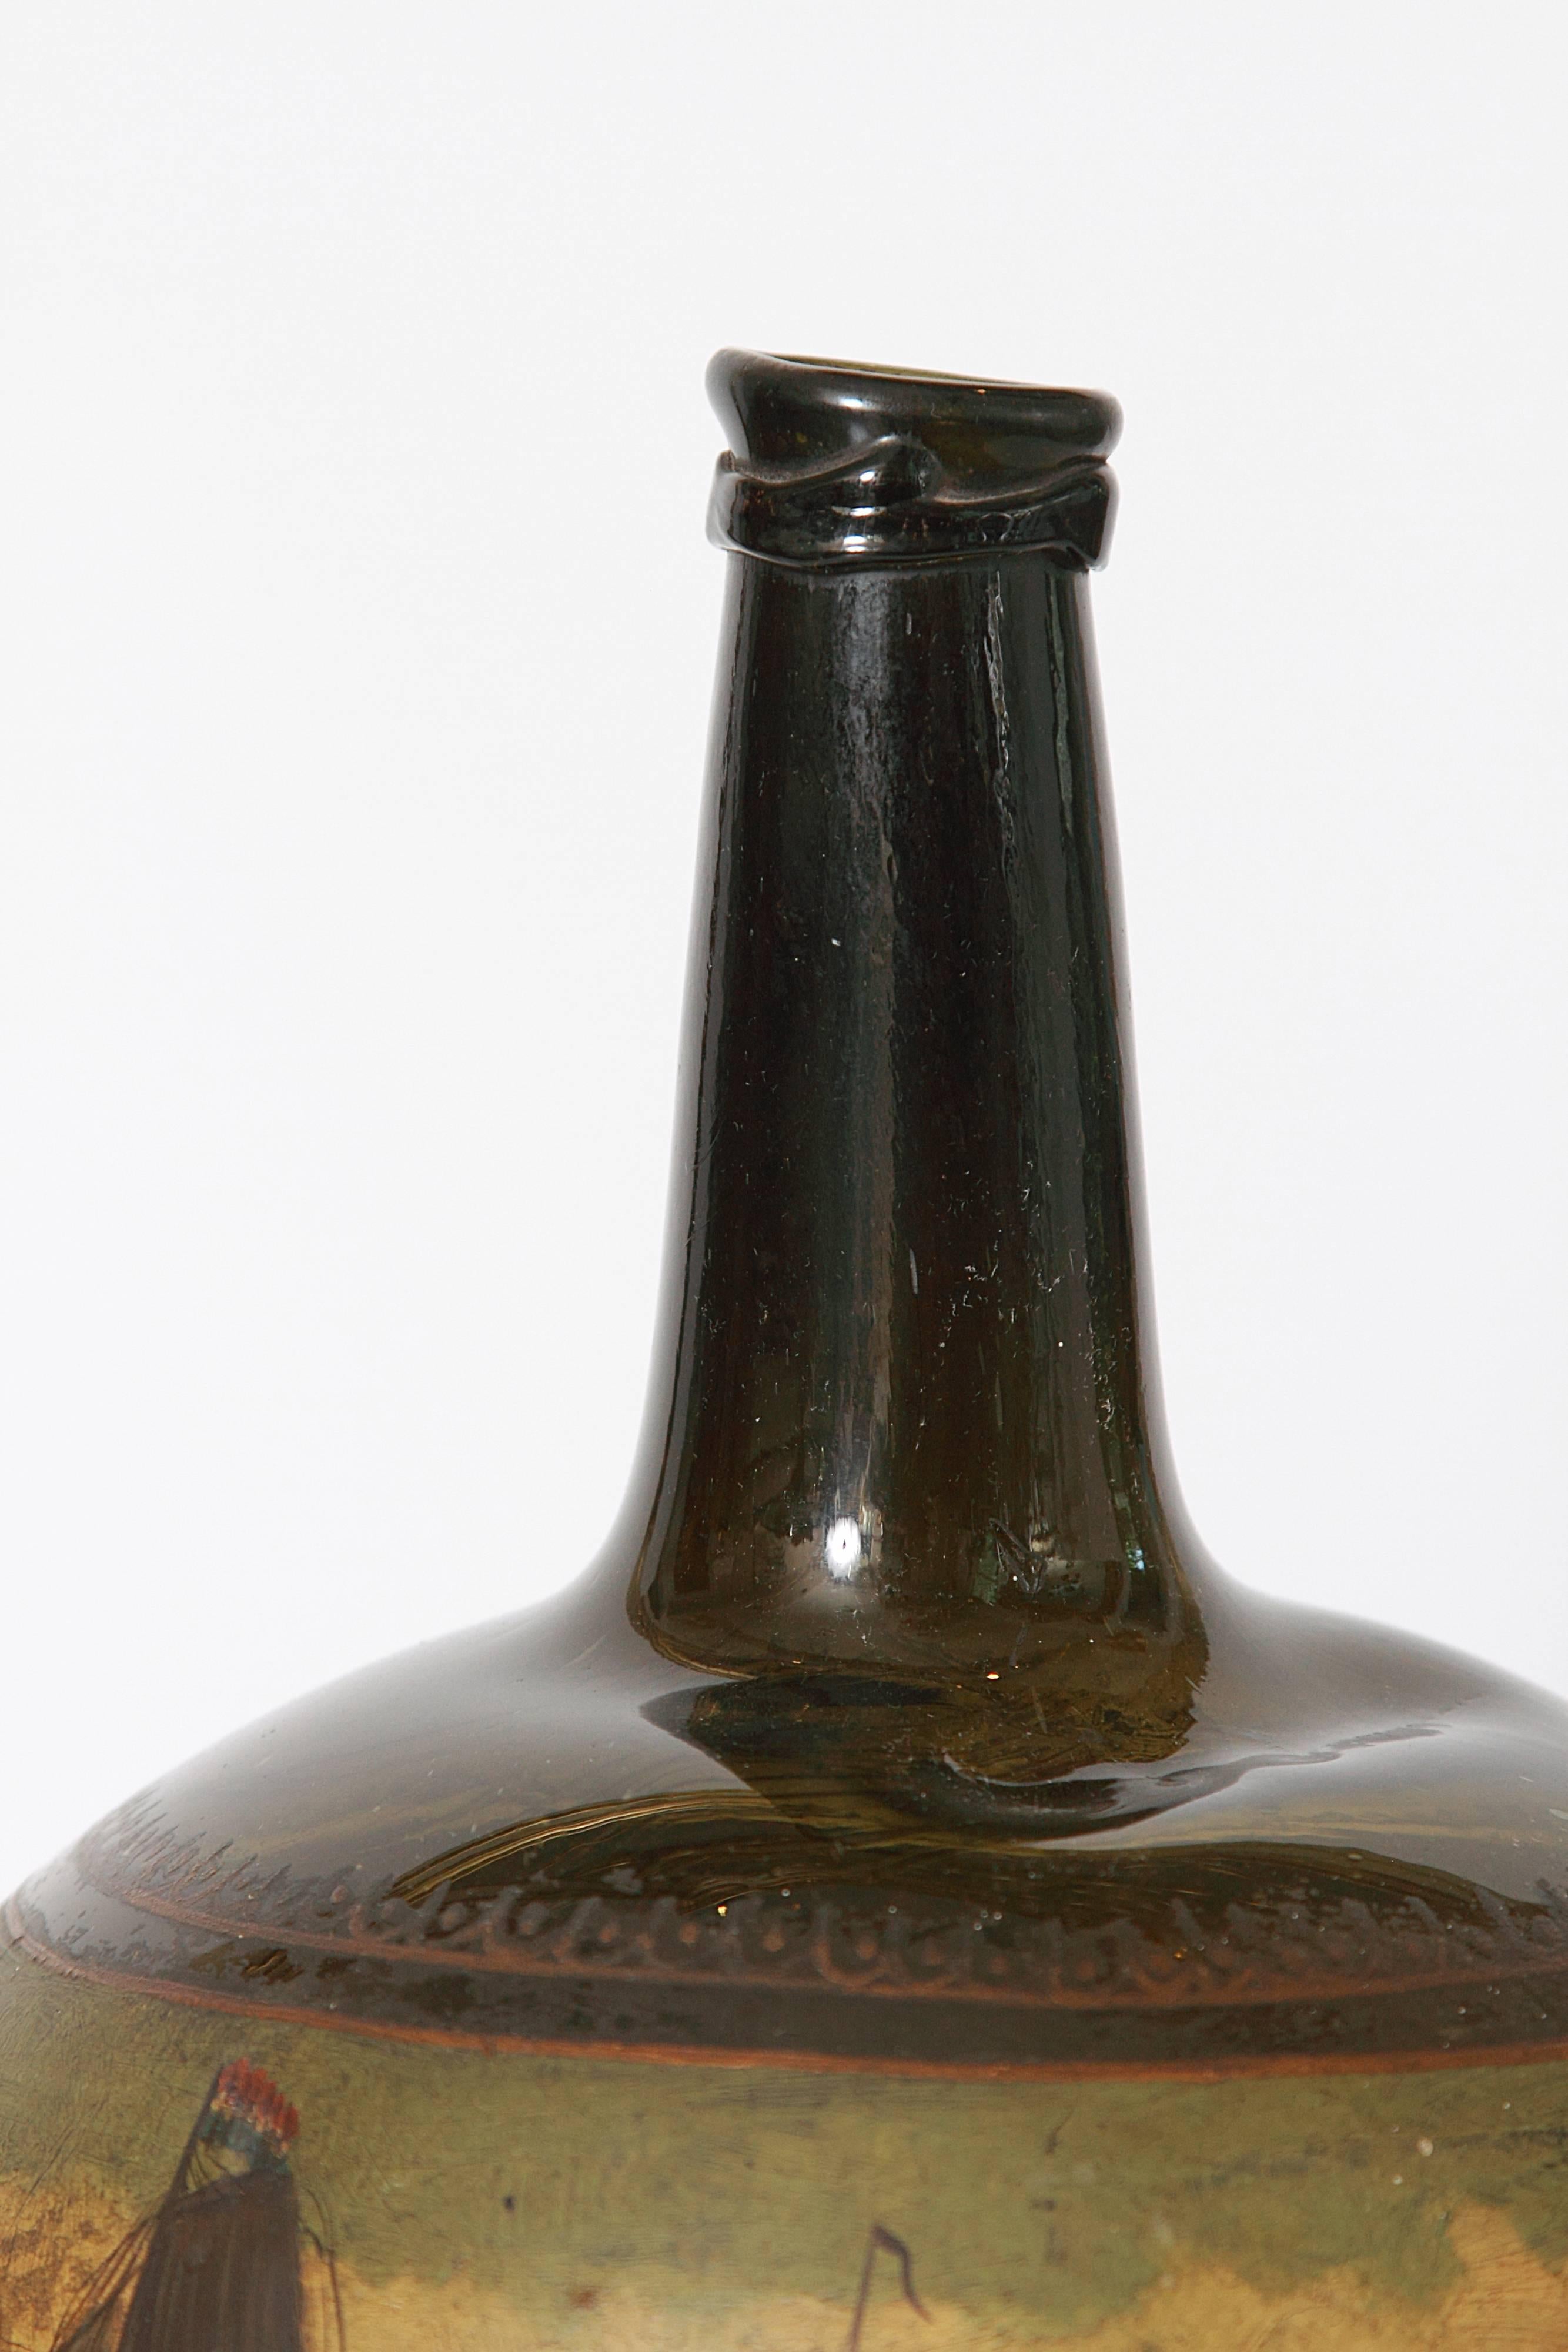 This Antique English 18th century painted glass onion wine bottle dates from circa 1680-1730. It is free blown and has a very unique and rare color. The form is an early bulbous shape. It has a high cone shape kicked up on underside and a tapering